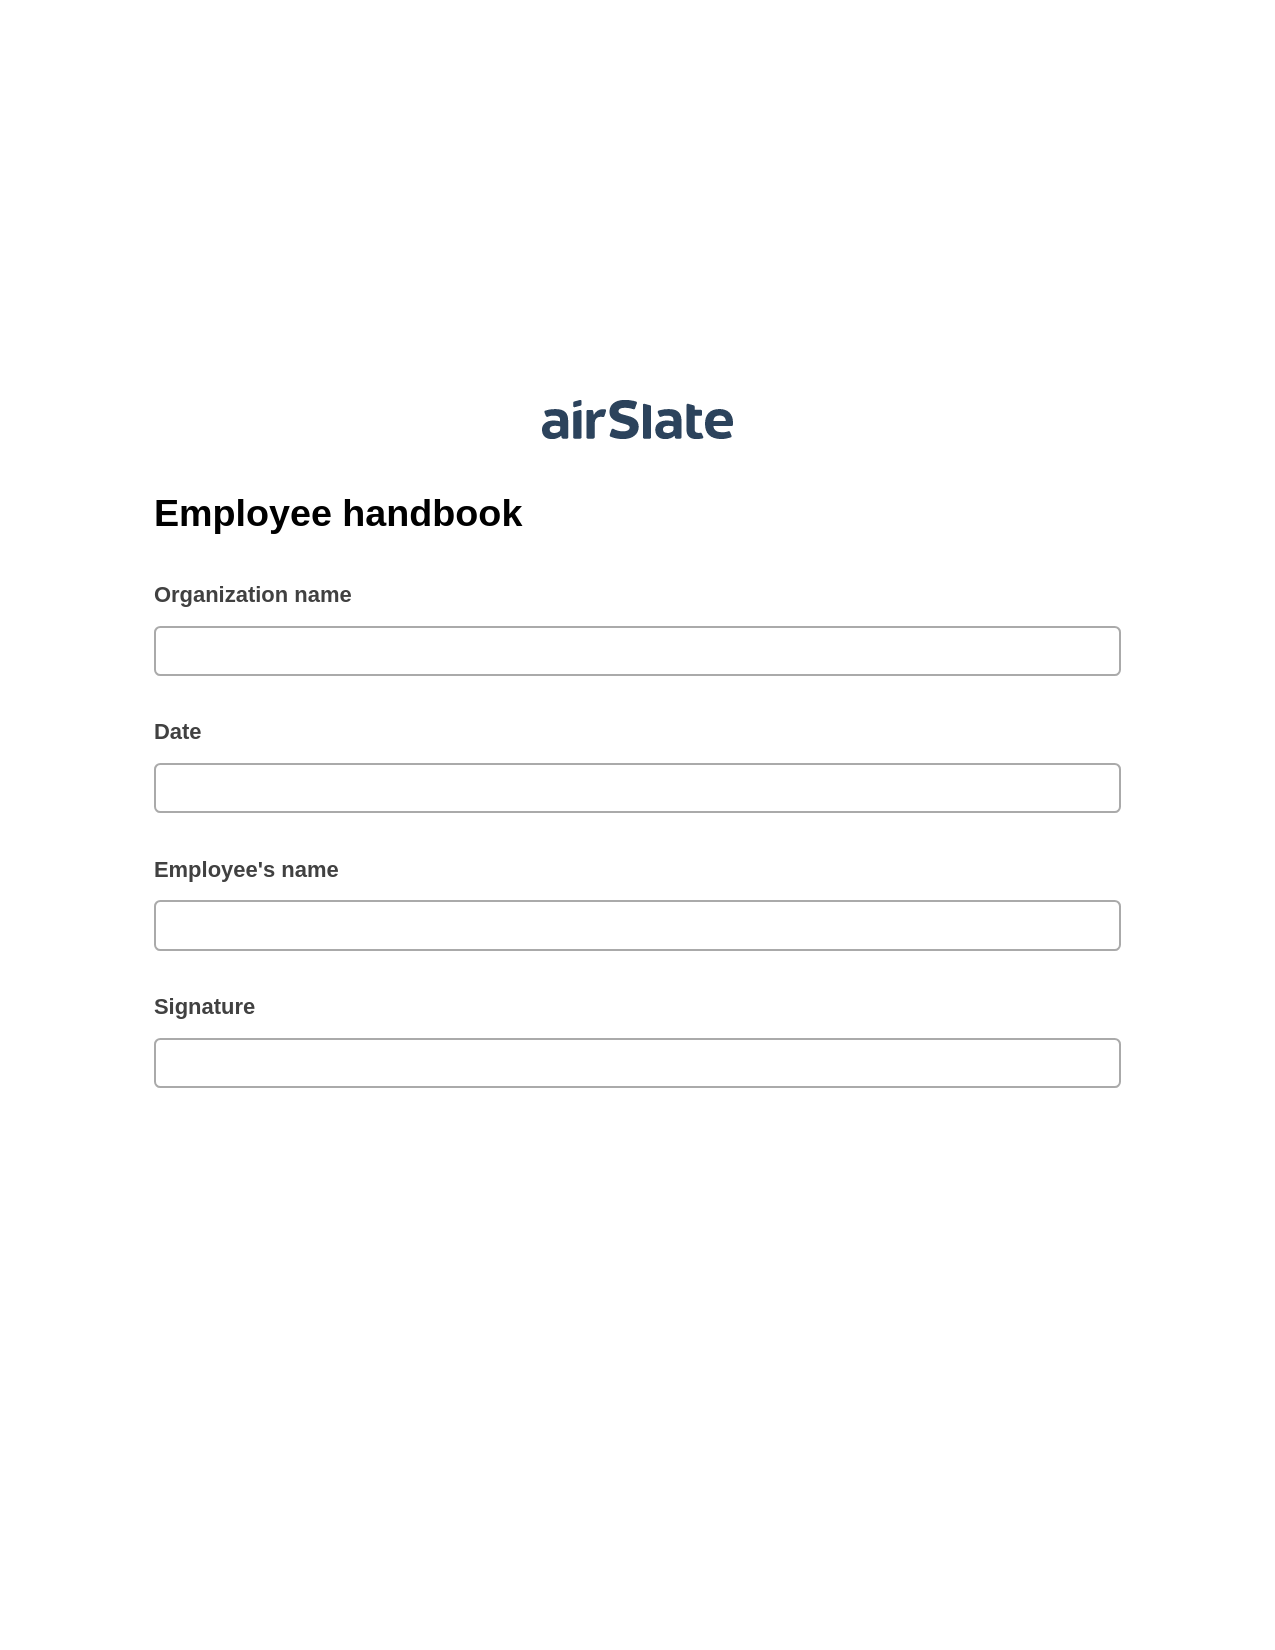 Multirole Employee handbook Pre-fill Dropdown from Airtable, Lock the slate bot, Export to Smartsheet